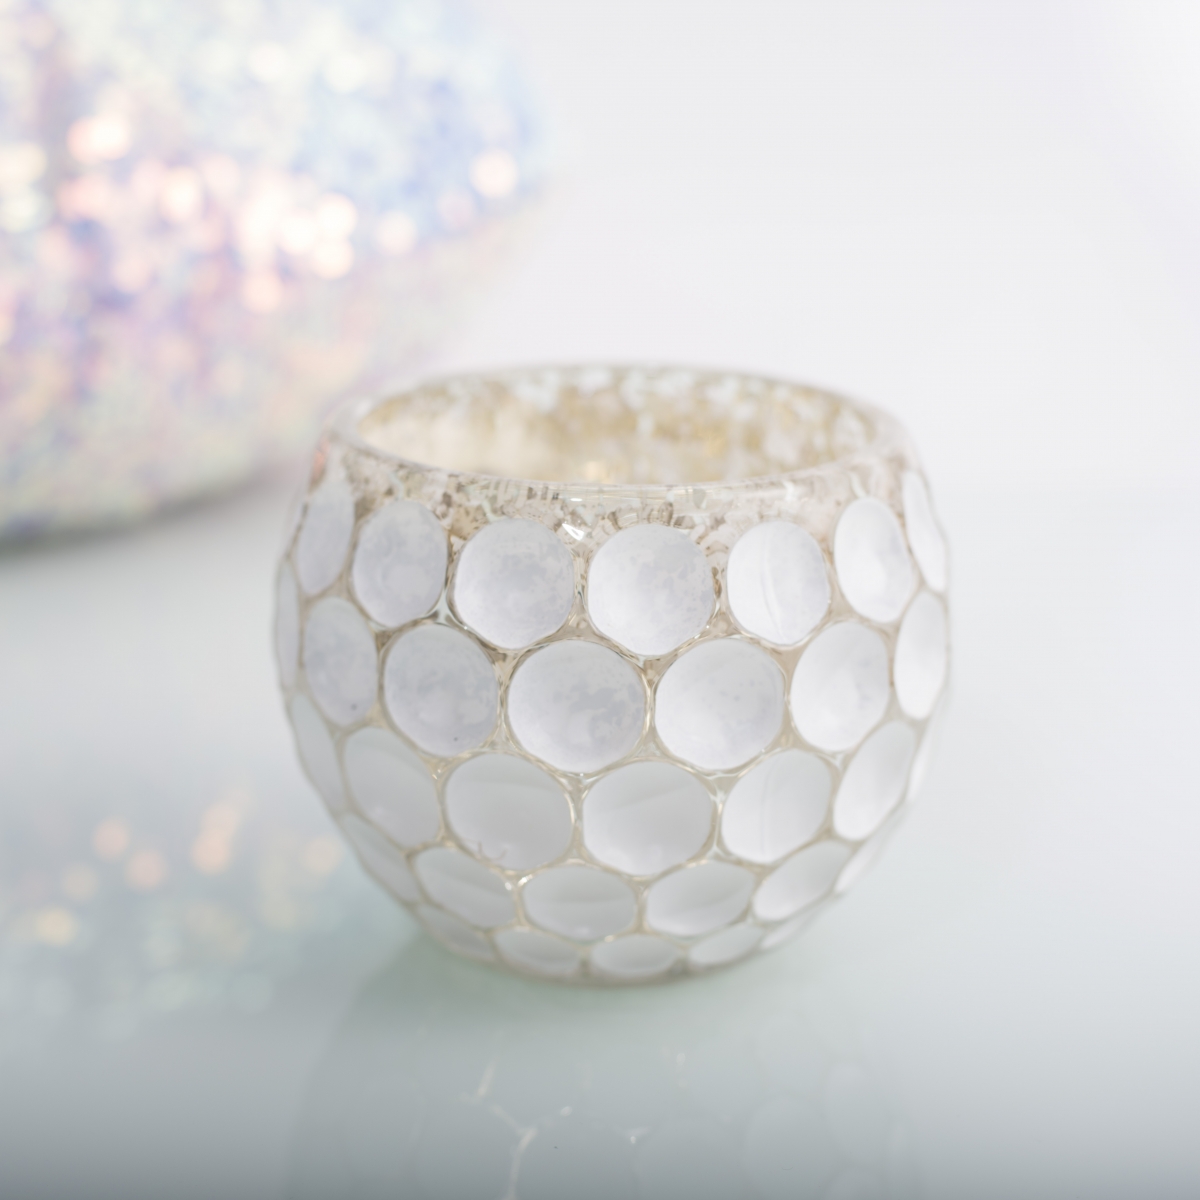 Candle Holder : White & Gold , Honeycomb Design ,Ball Shape Glass Jar ,Geometric Dots ,Christmas Decoration ,China Factory ,Wholesale Price-HOWCANDLE-Candles,Scented Candles,Aromatherapy Candles,Soy Candles,Vegan Candles,Jar Candles,Pillar Candles,Candle Gift Sets,Essential Oils,Reed Diffuser,Candle Holder,